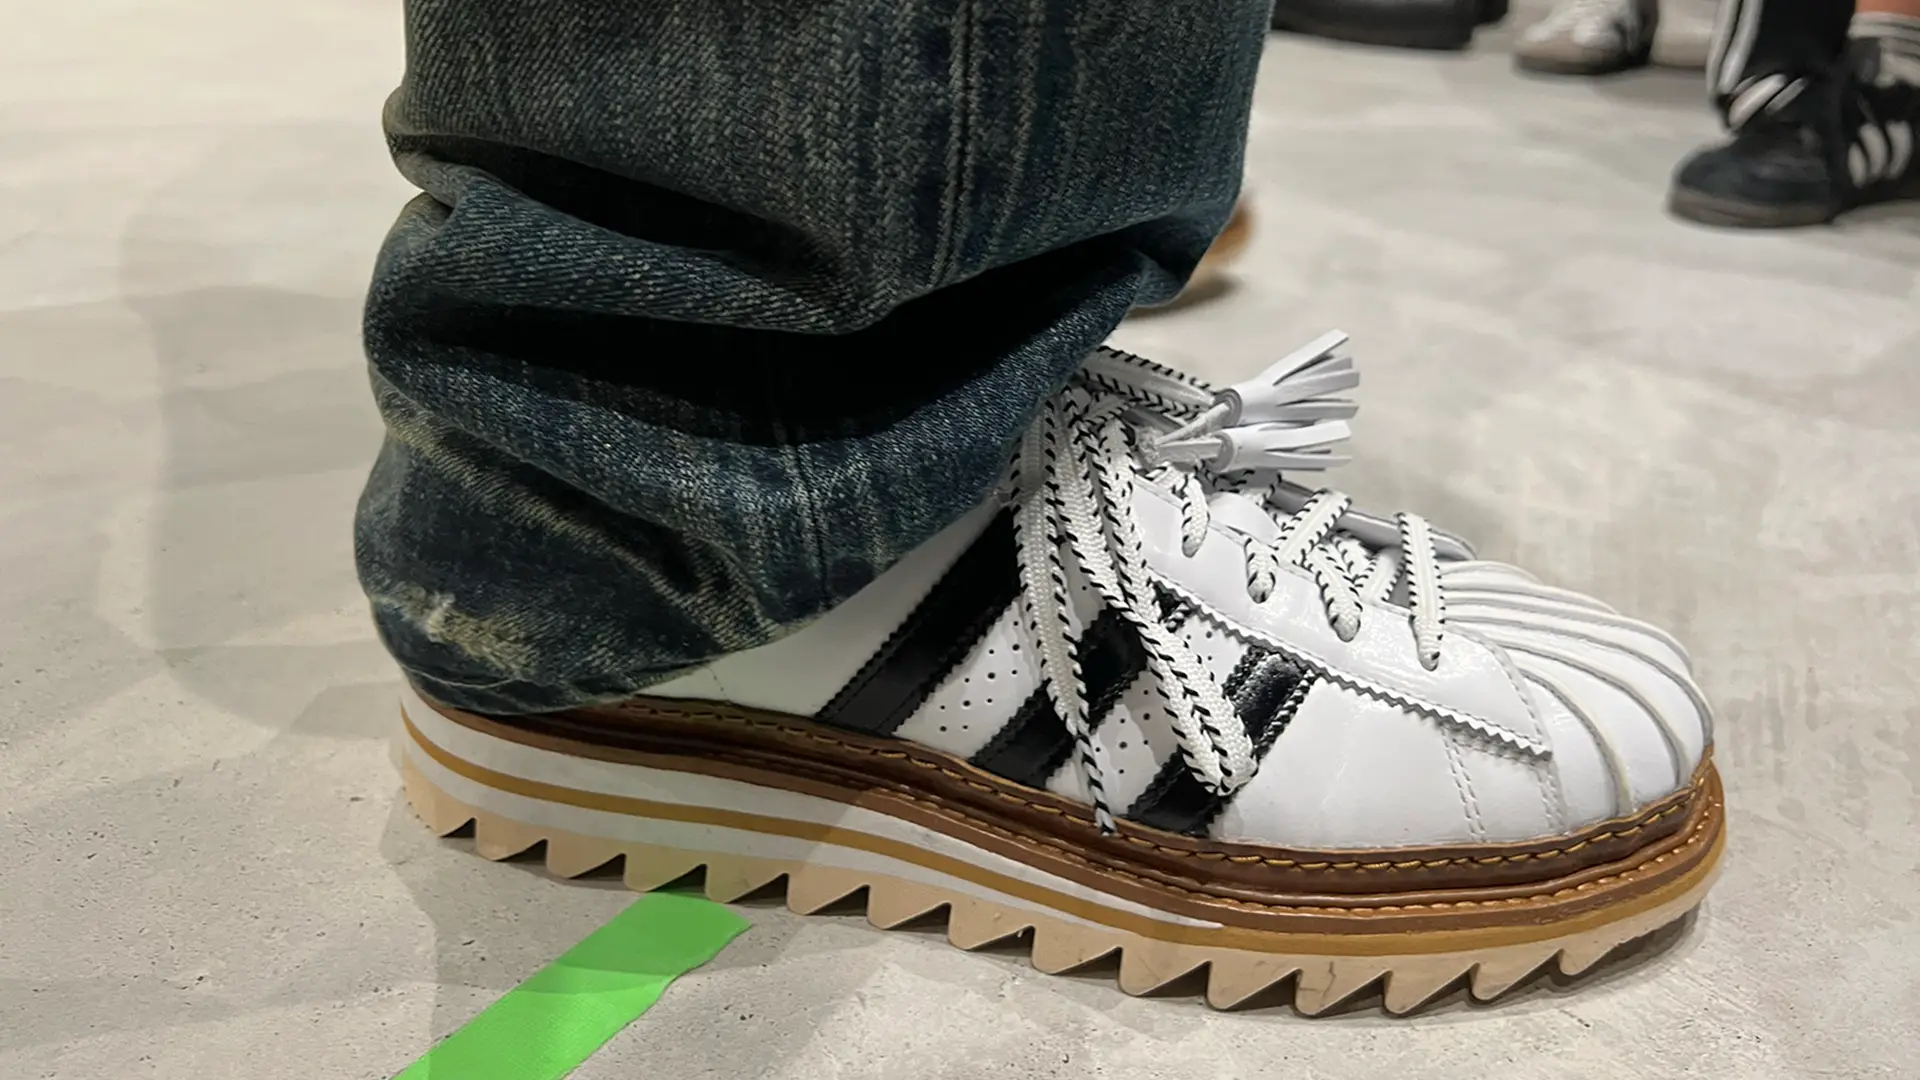 adidas x CLOT Is Here & It’s Not Quite What We Expected